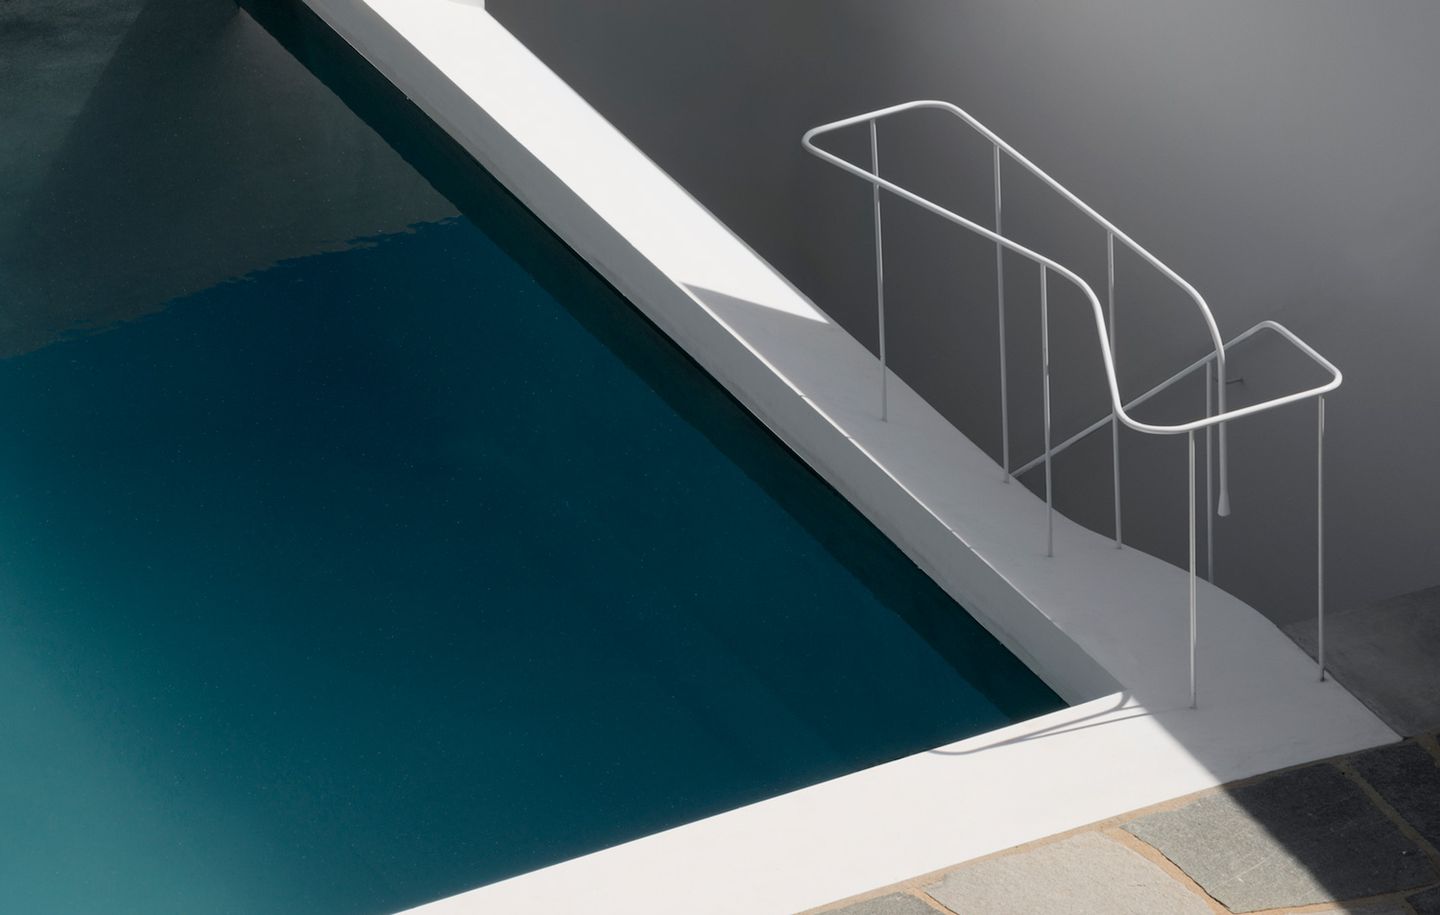  View of pool and handrail at beachfront house at Tamarama Sydney designed by Durbach Block Jaggers Architects